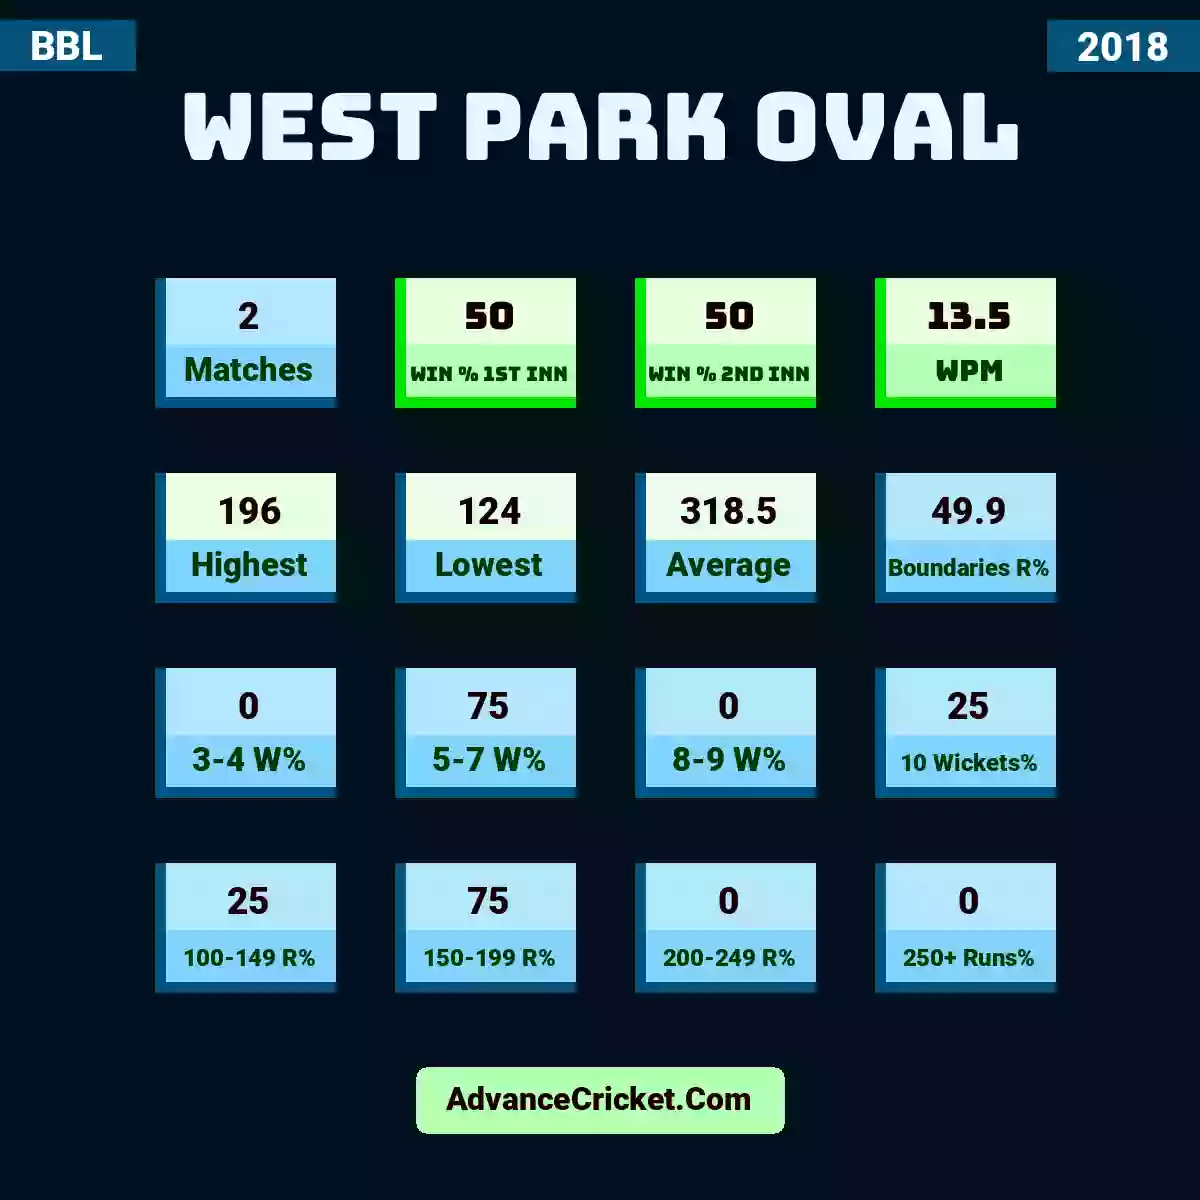 Image showing West Park Oval with Matches: 2, Win % 1st Inn: 50, Win % 2nd Inn: 50, WPM: 13.5, Highest: 196, Lowest: 124, Average: 318.5, Boundaries R%: 49.9, 3-4 W%: 0, 5-7 W%: 75, 8-9 W%: 0, 10 Wickets%: 25, 100-149 R%: 25, 150-199 R%: 75, 200-249 R%: 0, 250+ Runs%: 0.